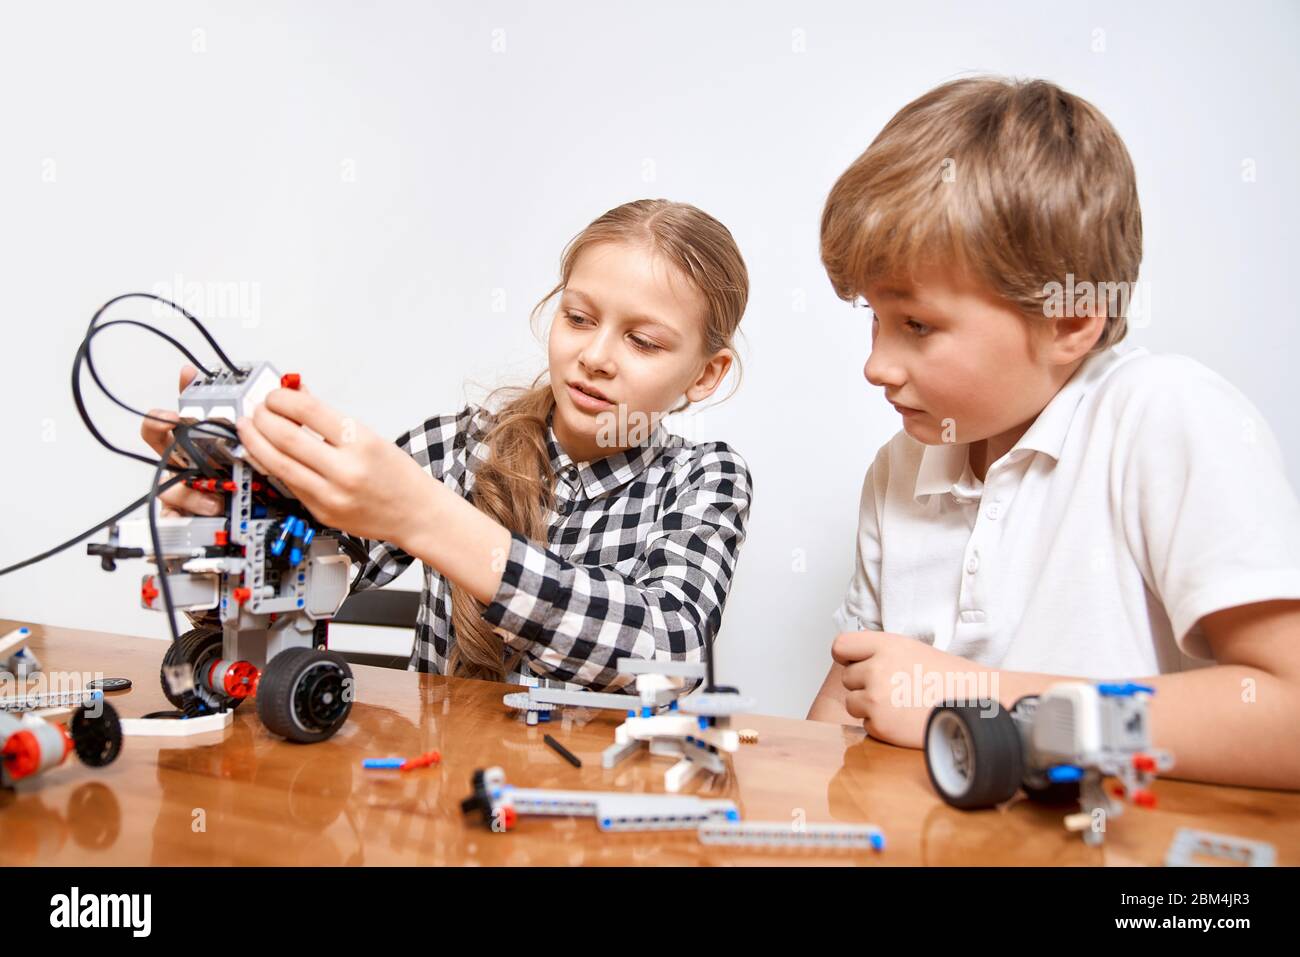 Front view of boy helping girl in creating robot using building kit for kids on table. Nice interested friends smiling, chatting and working on project together. Concept of science engineering. Stock Photo